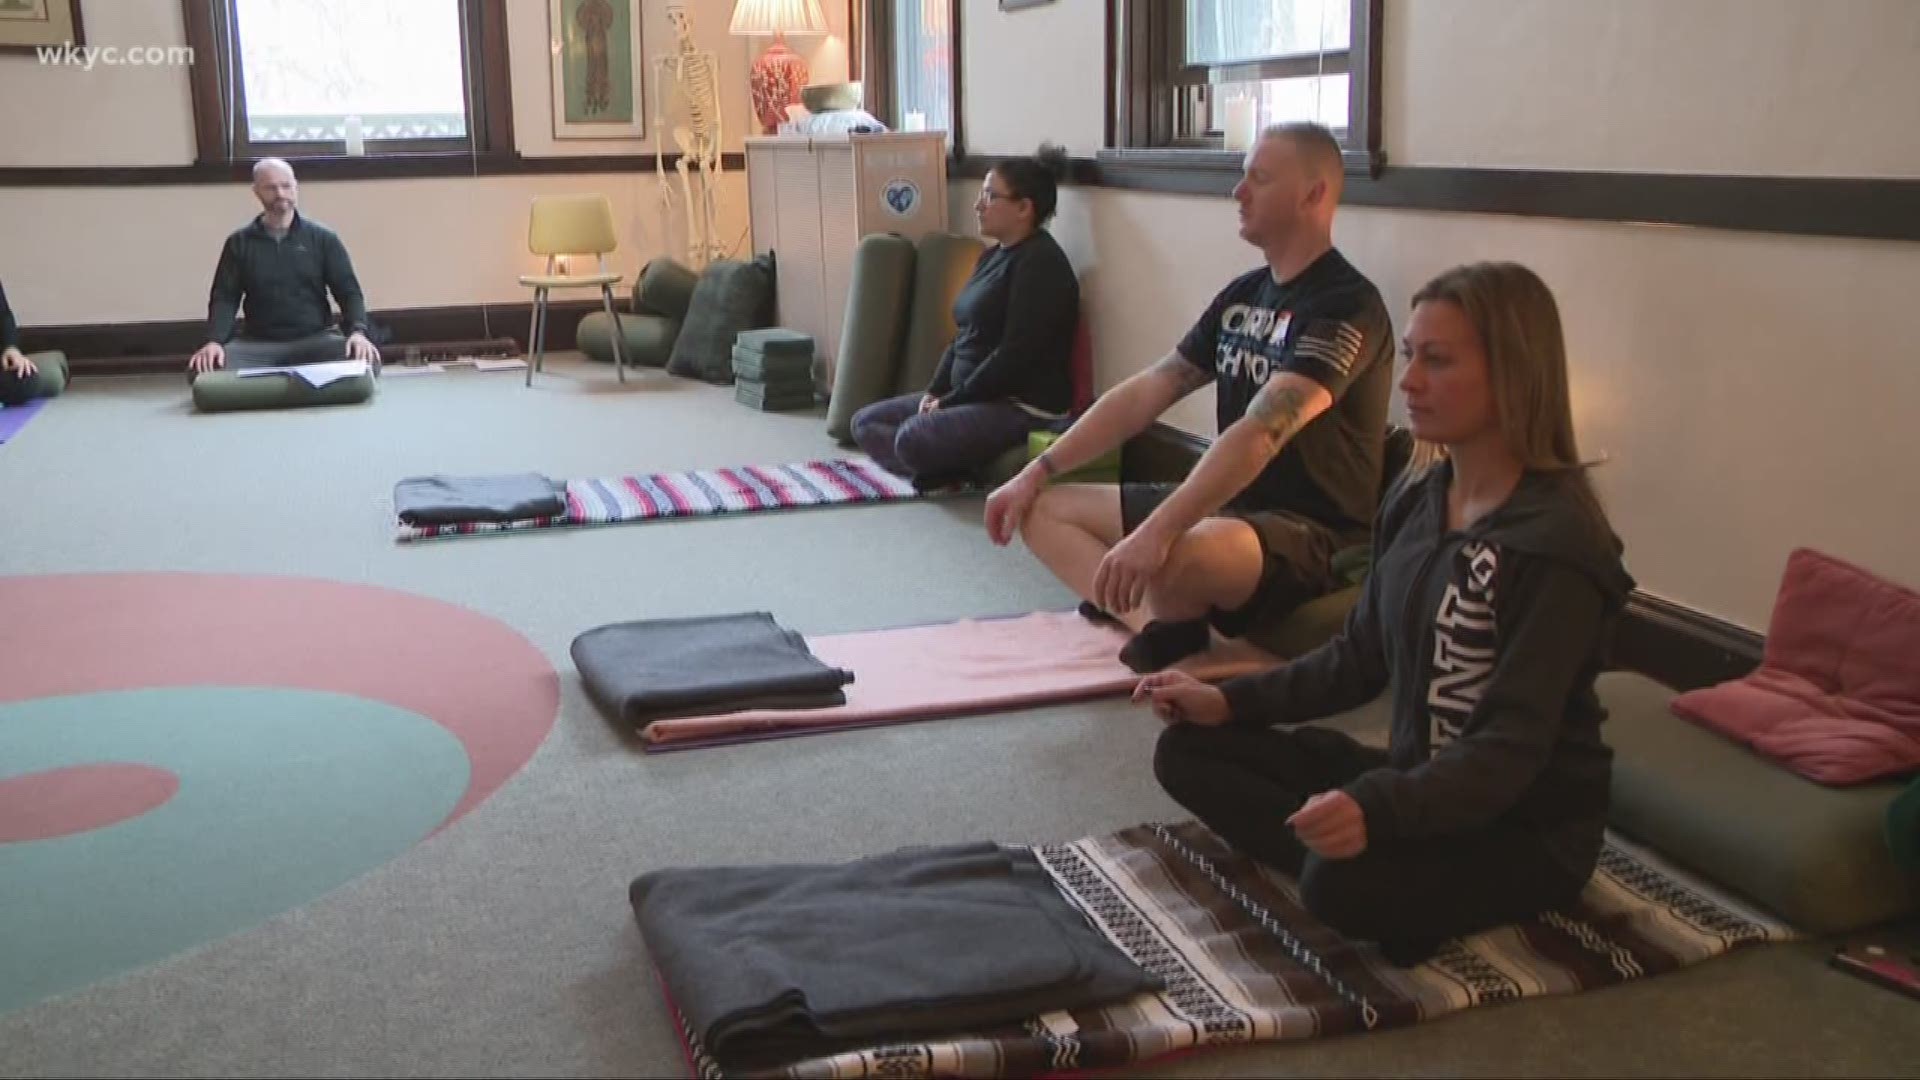 Monica Robins shares how many police officers are finding comfort and calmness through yoga.